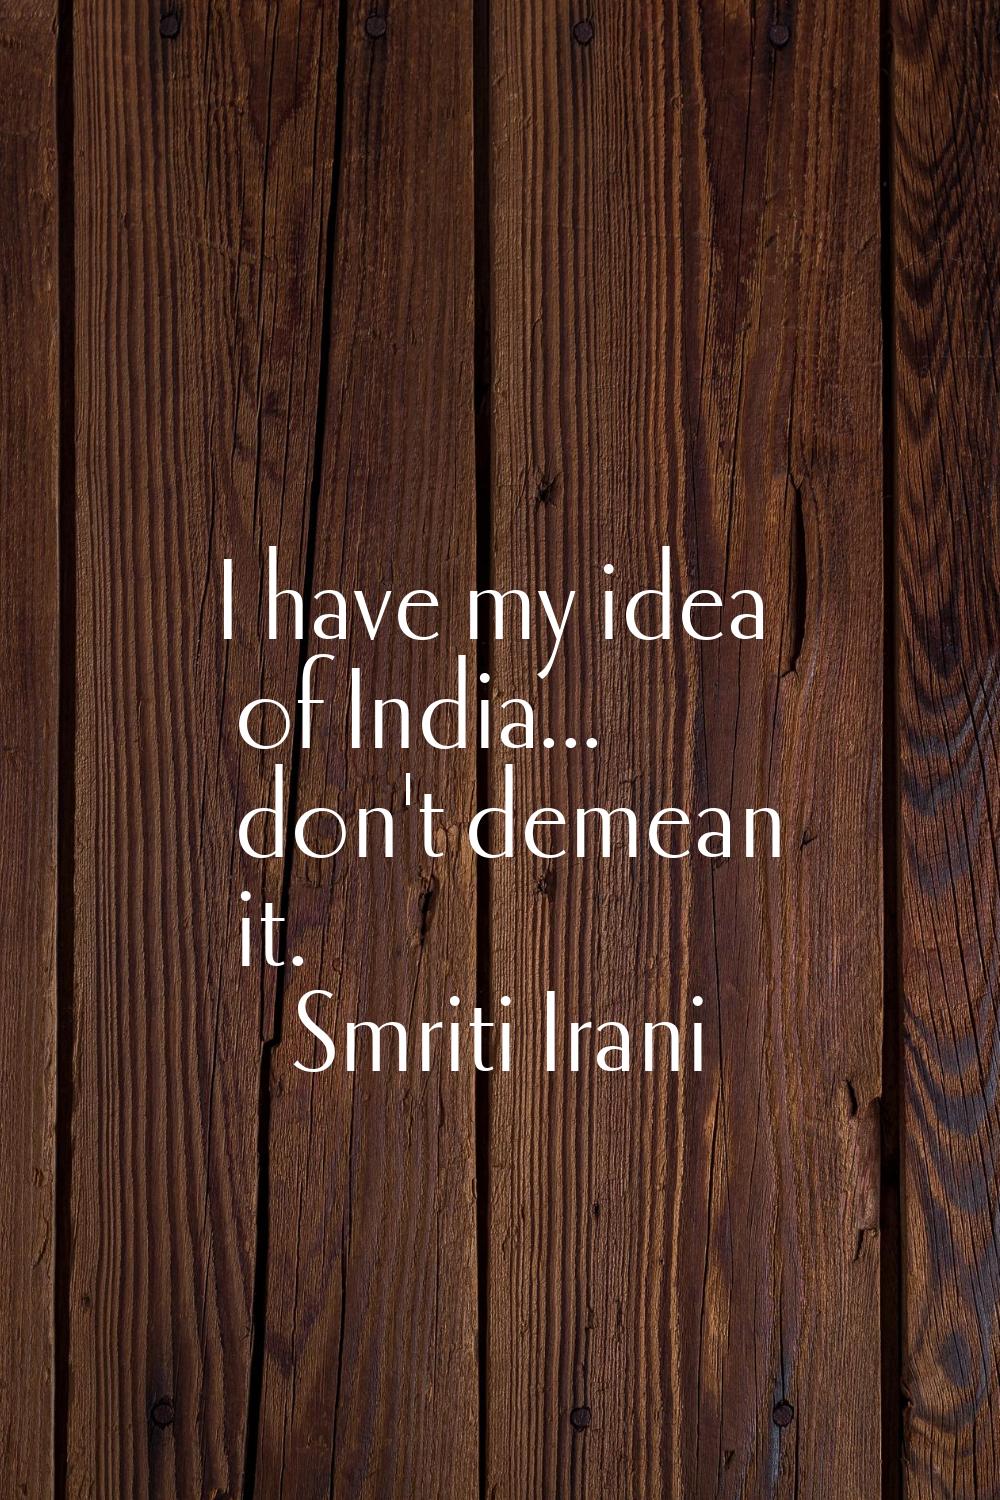 I have my idea of India... don't demean it.